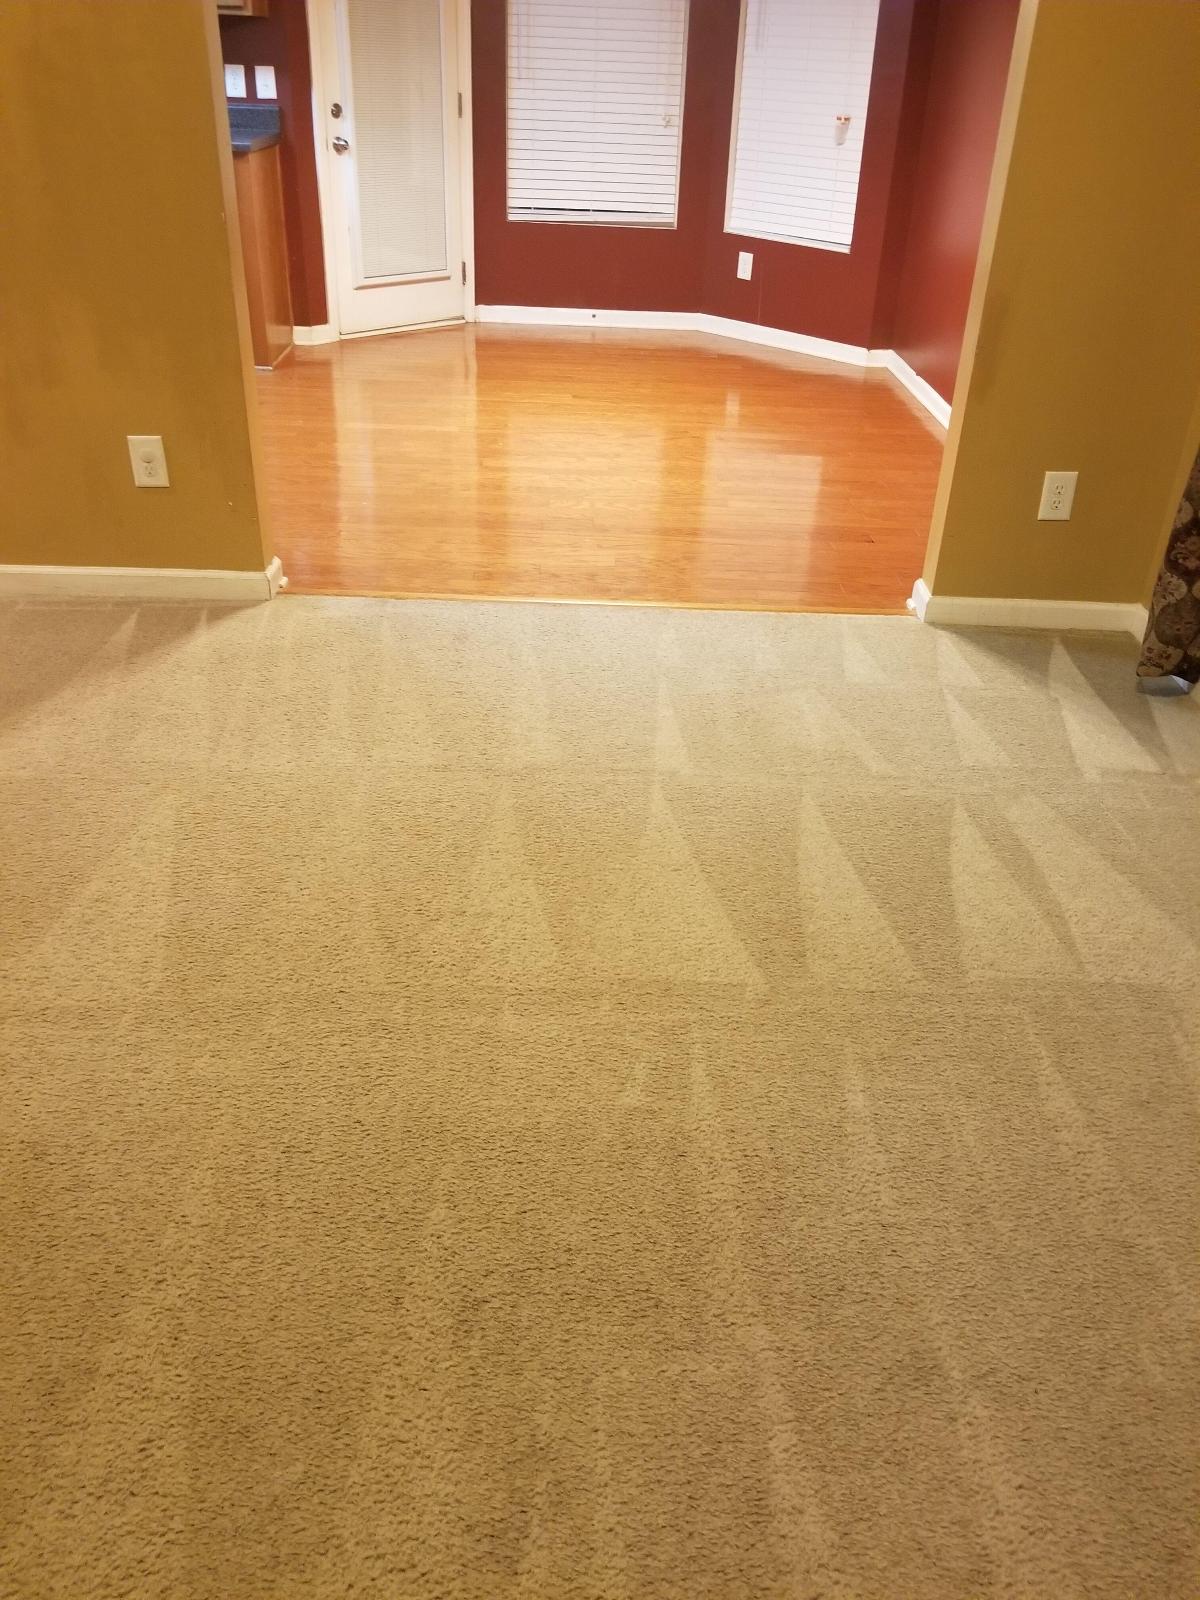 Carpet Cleaning Services in Cary and Morrisville